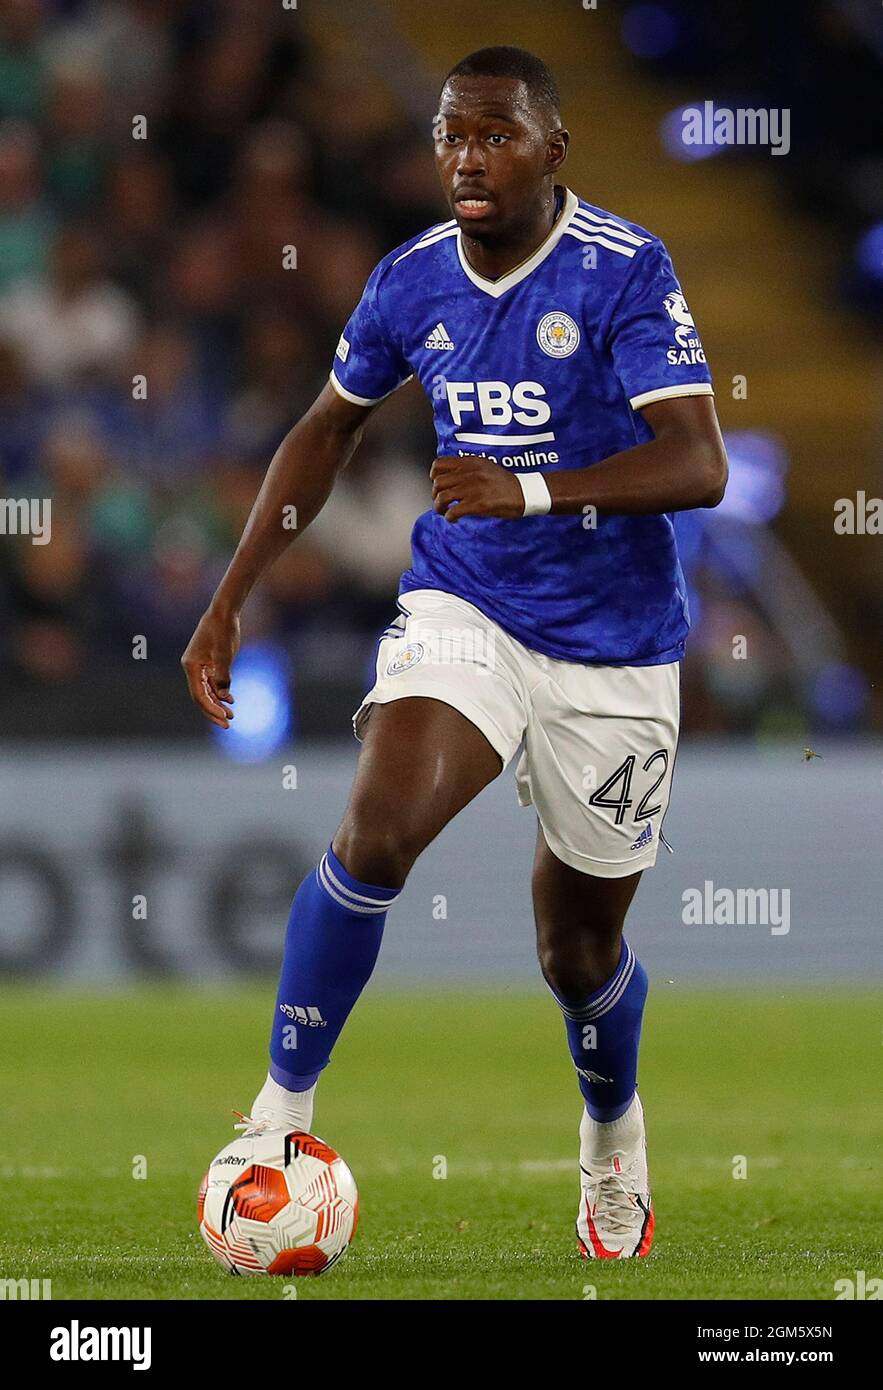 Leicester, UK. 16th Sep, 2021. Boubakary Soumare of Leicester City during the UEFA Europa League match at the King Power Stadium, Leicester. Picture credit should read: Darren Staples/Sportimage Credit: Sportimage/Alamy Live News Stock Photo